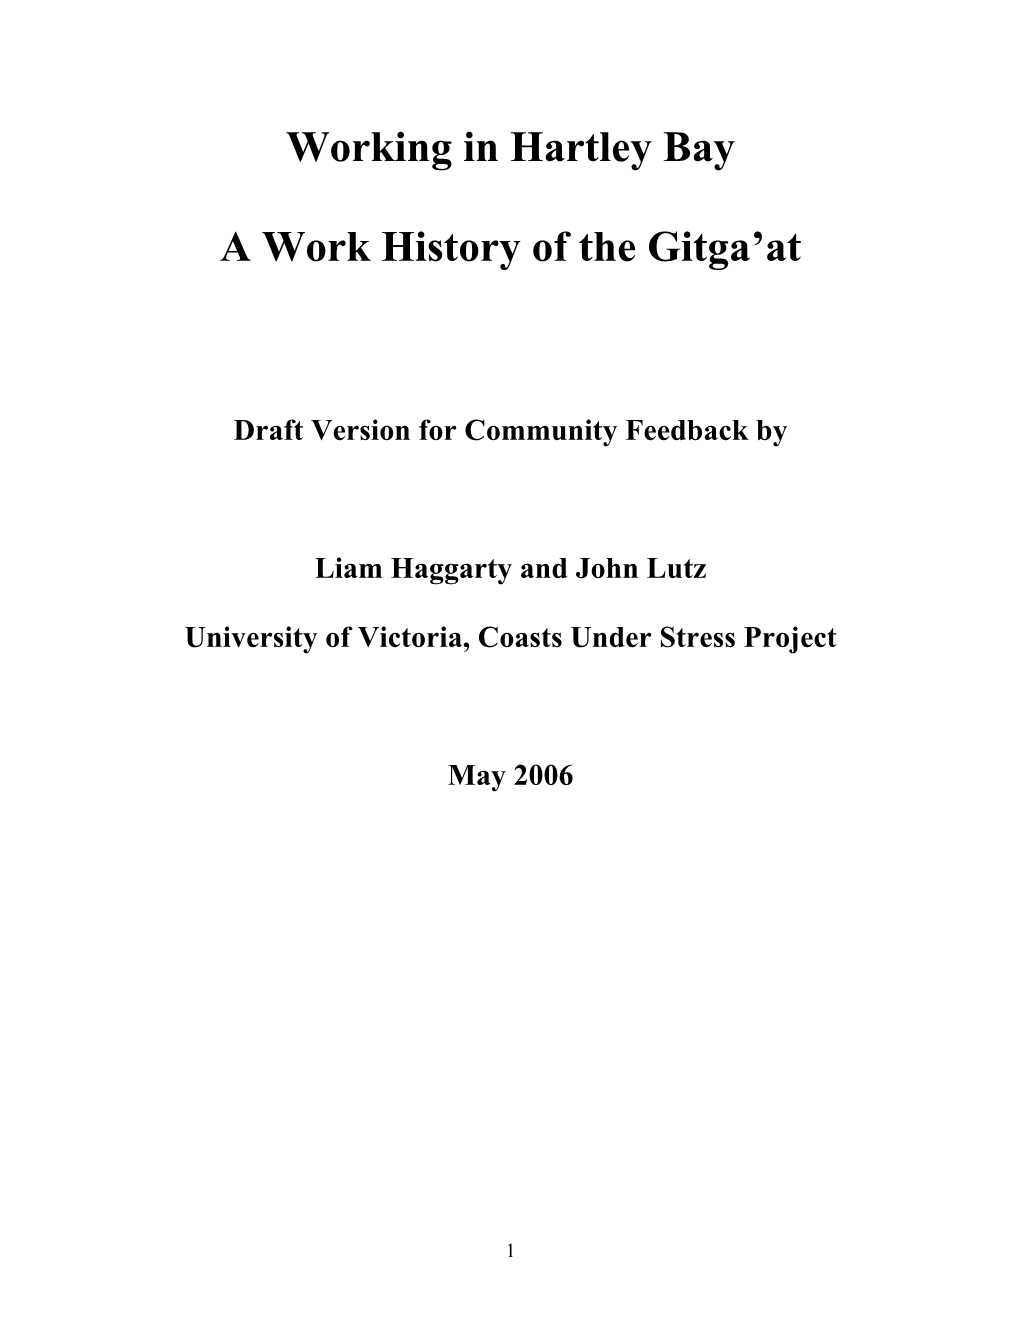 Working in Hartley Bay a Work History of the Gitga'at